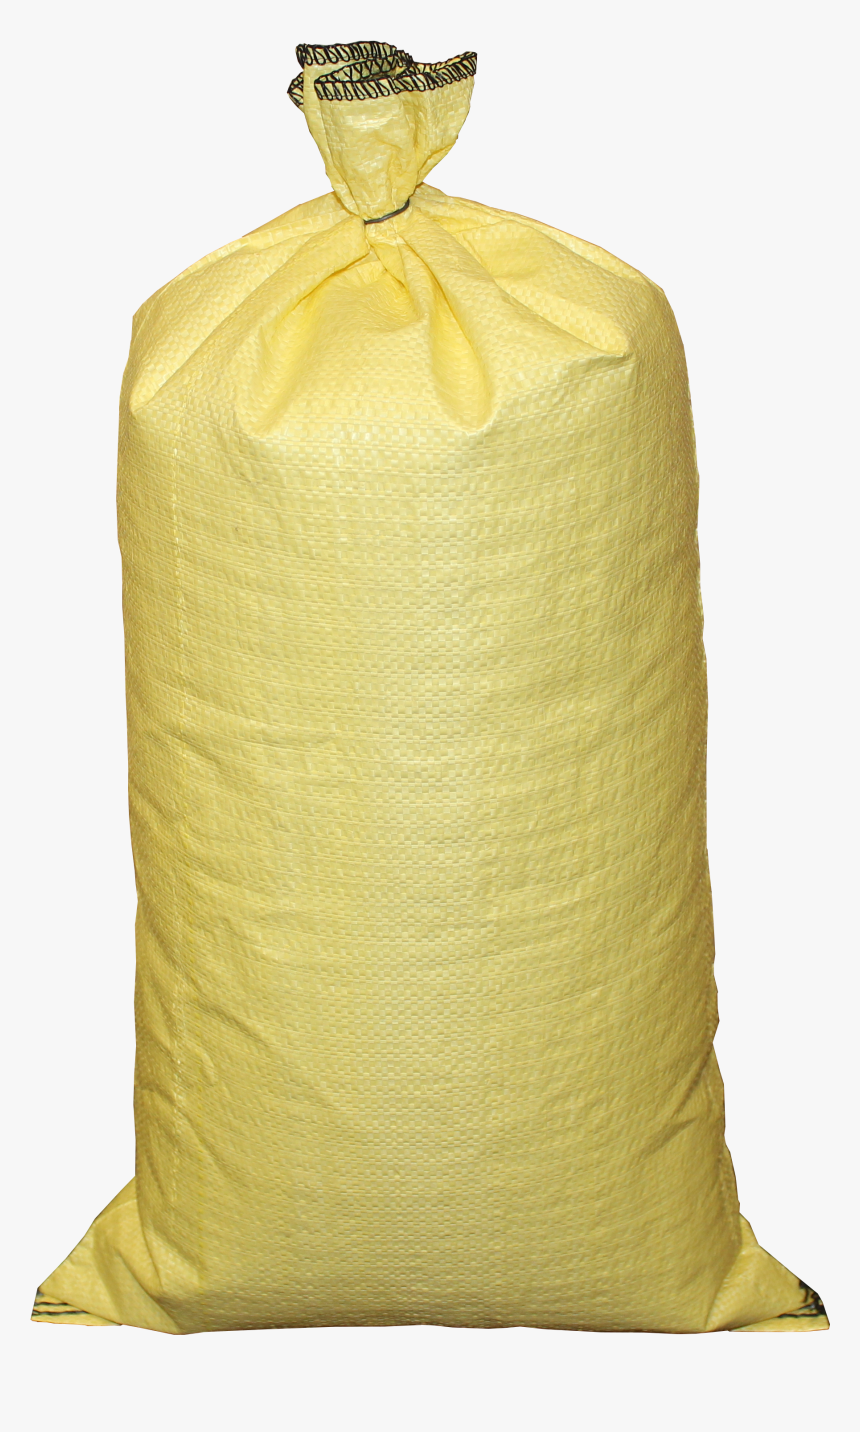 High Uv White Sandbags And Tube Sandbags - Sand Bags Transparent Background, HD Png Download, Free Download